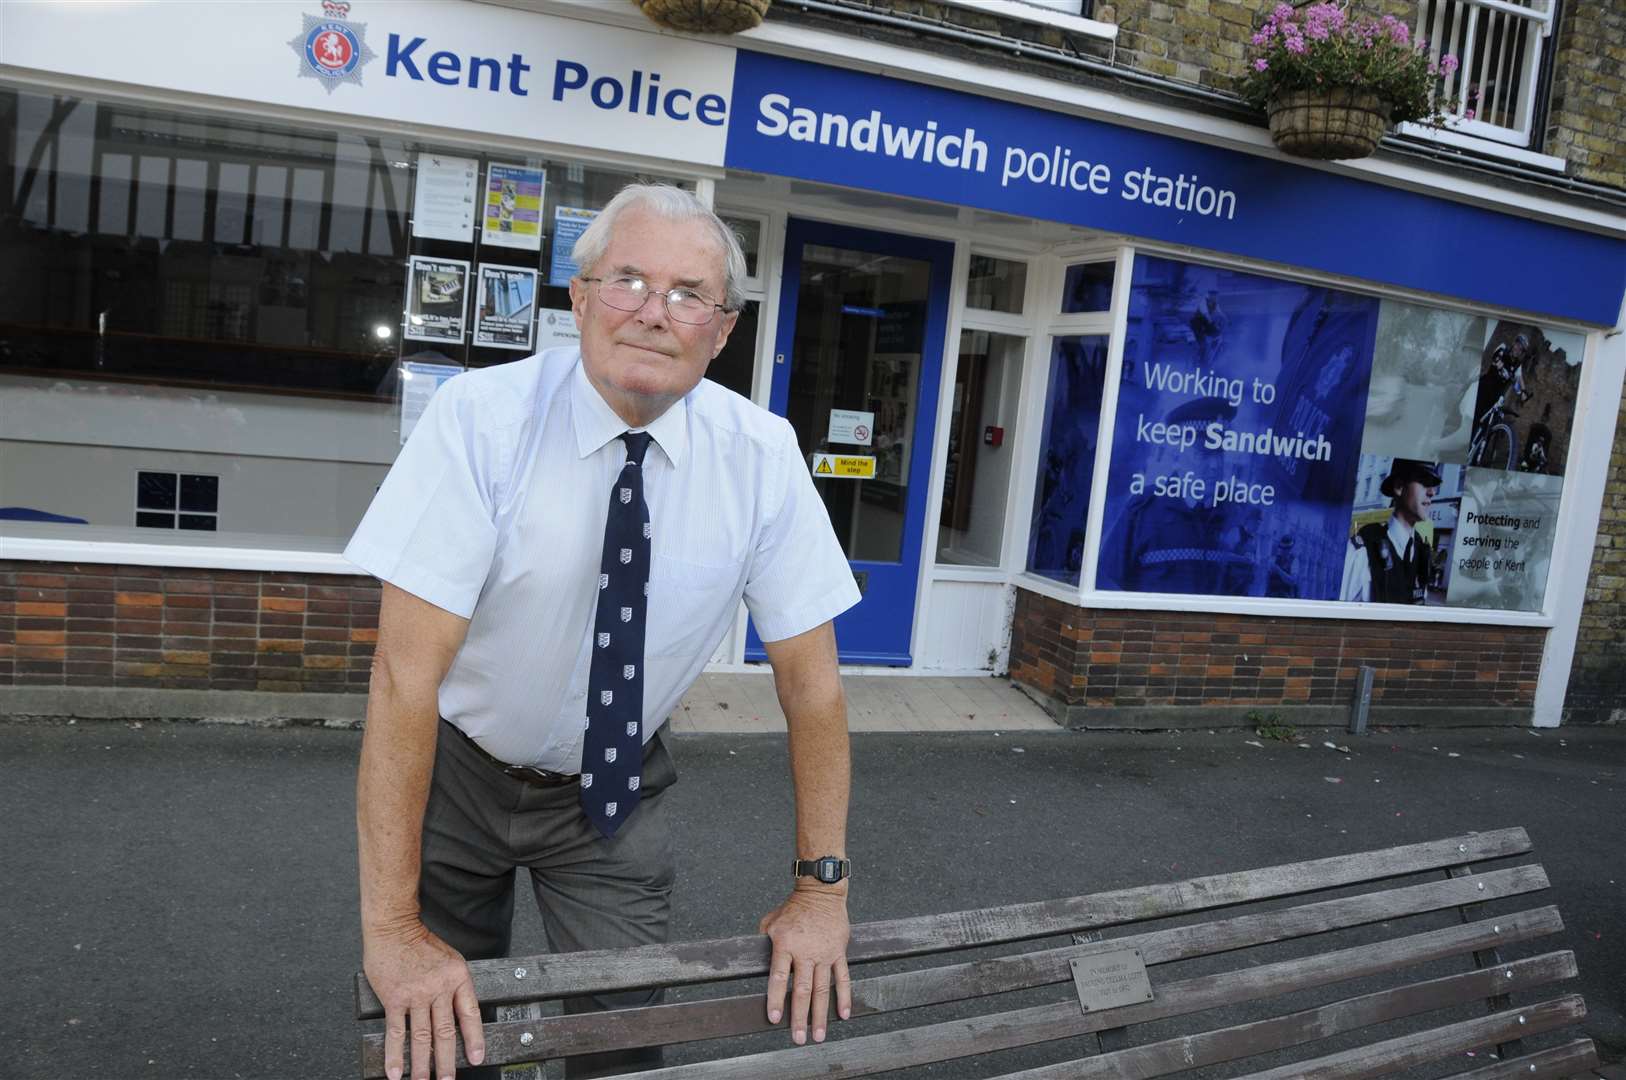 Then Mayor of Sandwich Cllr Jeremy Watts outside Sandwich Police Station before it was due to close